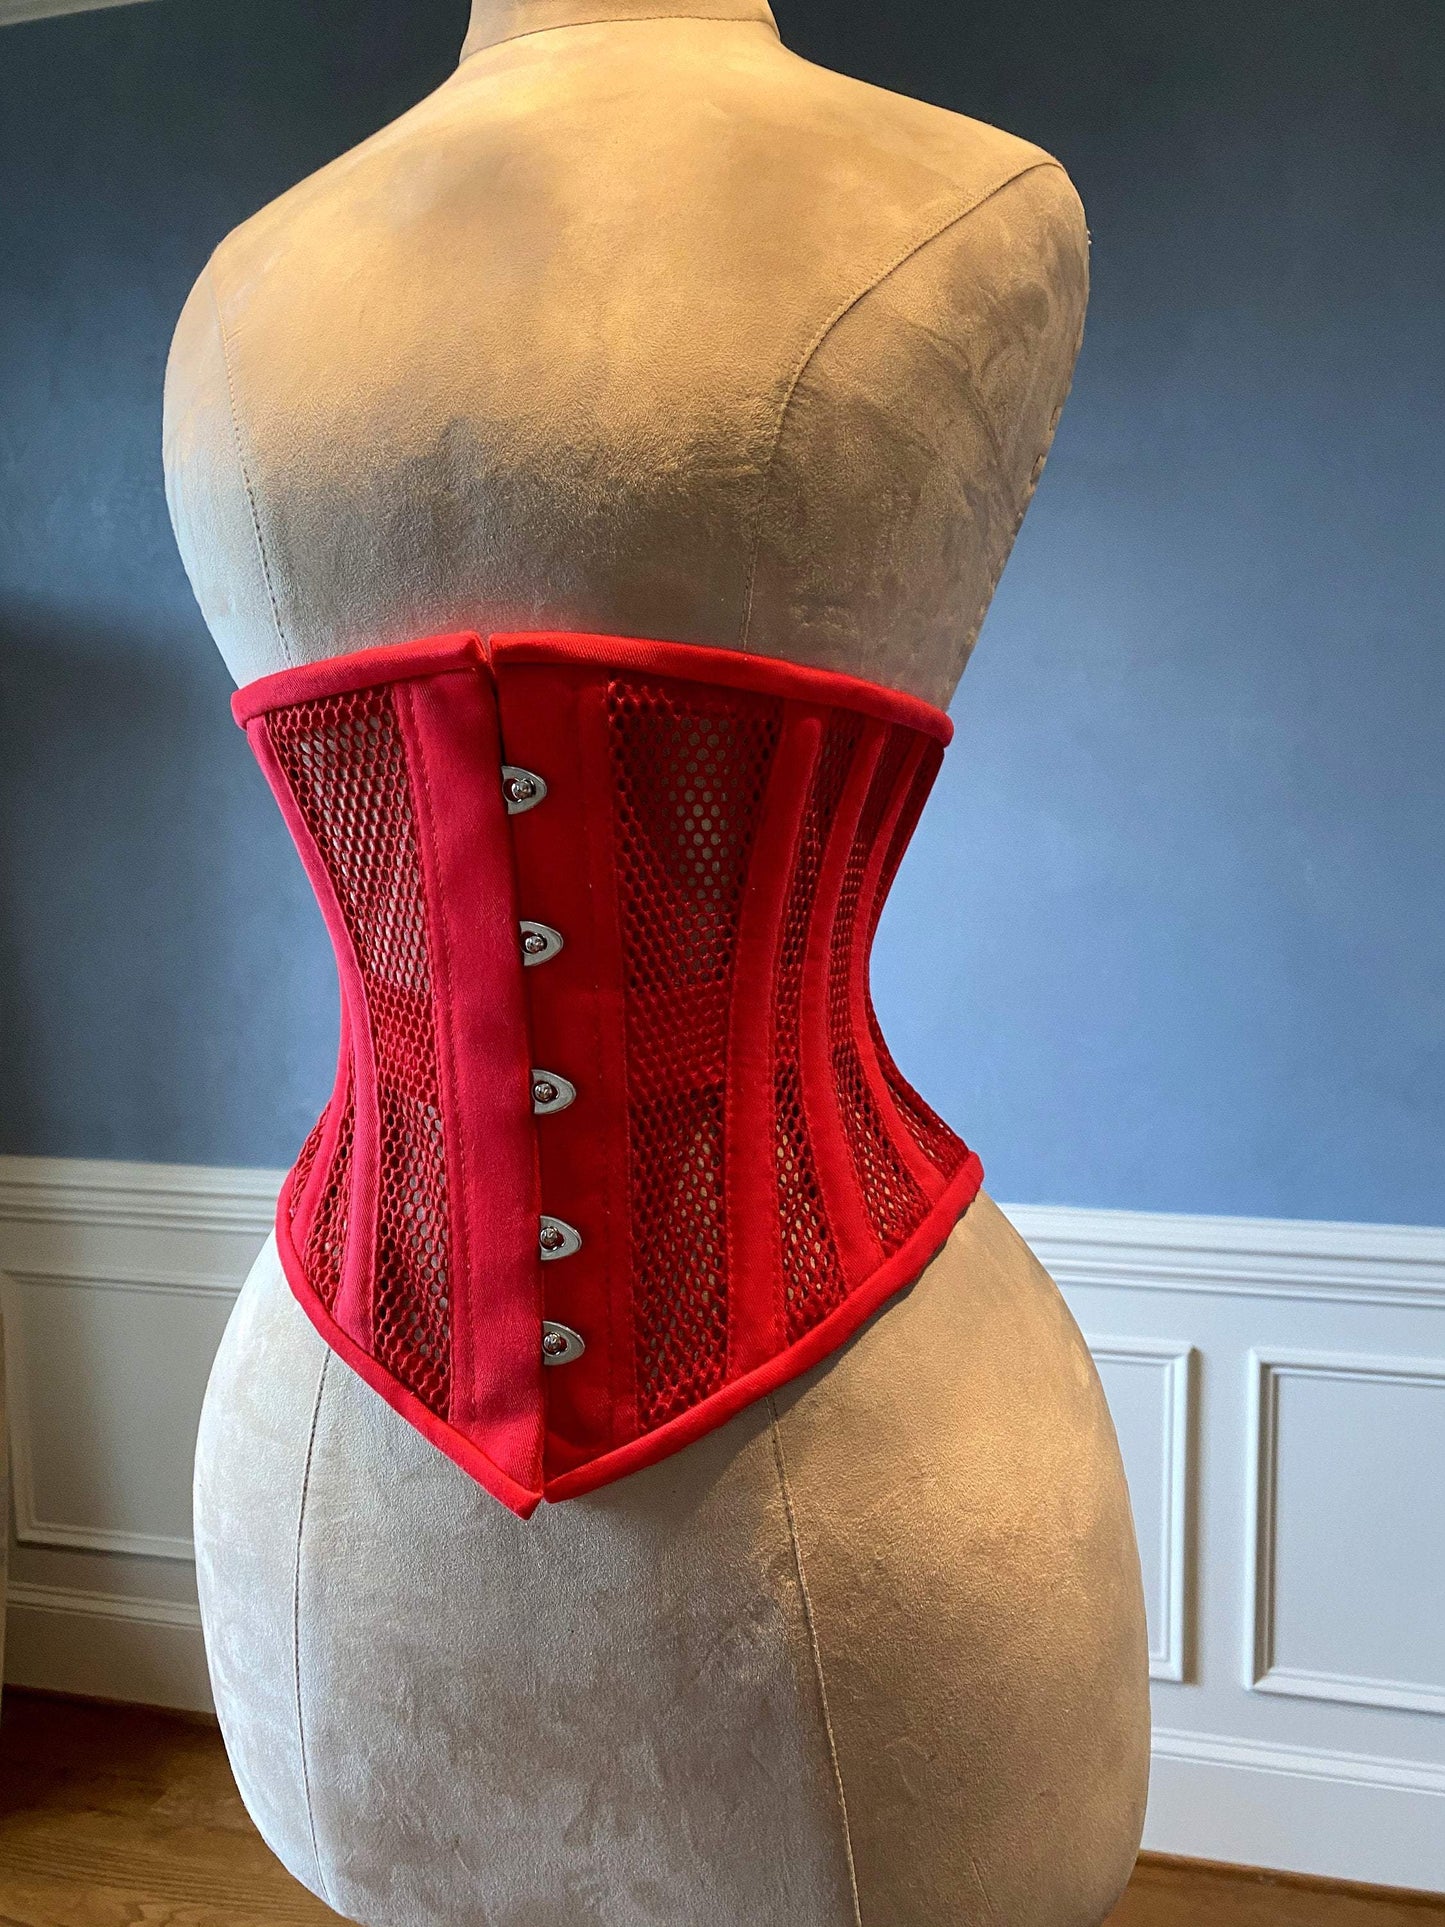 Real steel boned underbust underwear red corset from transparent mesh and cotton. Real waist training corset for tight lacing. Corsettery